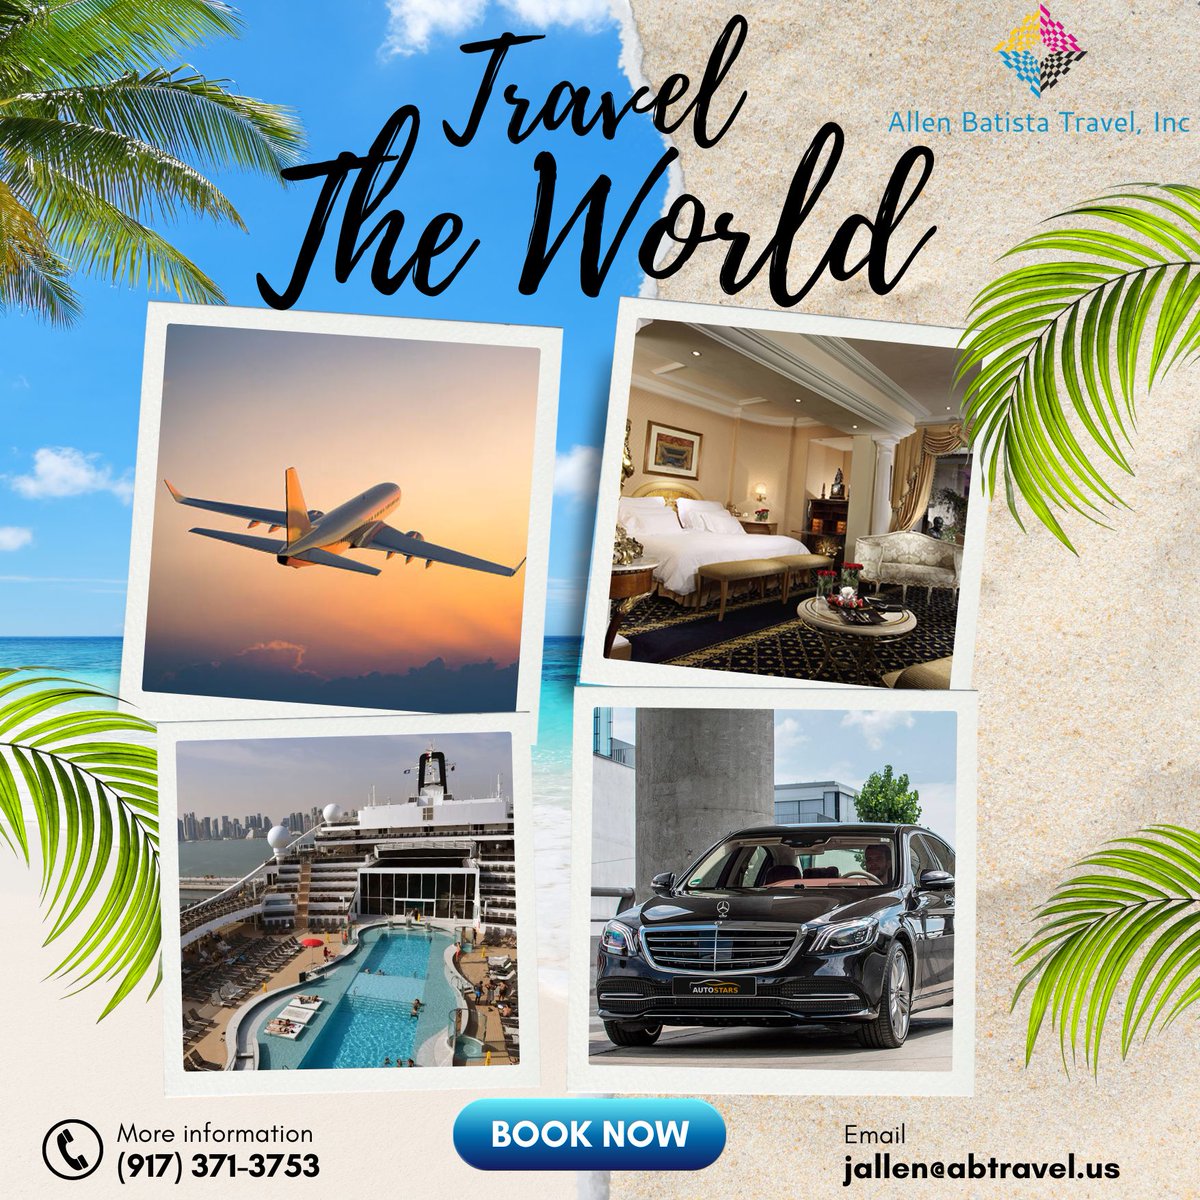 Are you looking for inspiration for your next vacation? Contact Allen Batista Travel, Inc. to book your airfare, hotels, cruises to car rentals. Call us and plan your dream vacation today!
abtravel.us
#TravelPlanning #FlightDeals #CruiseLife